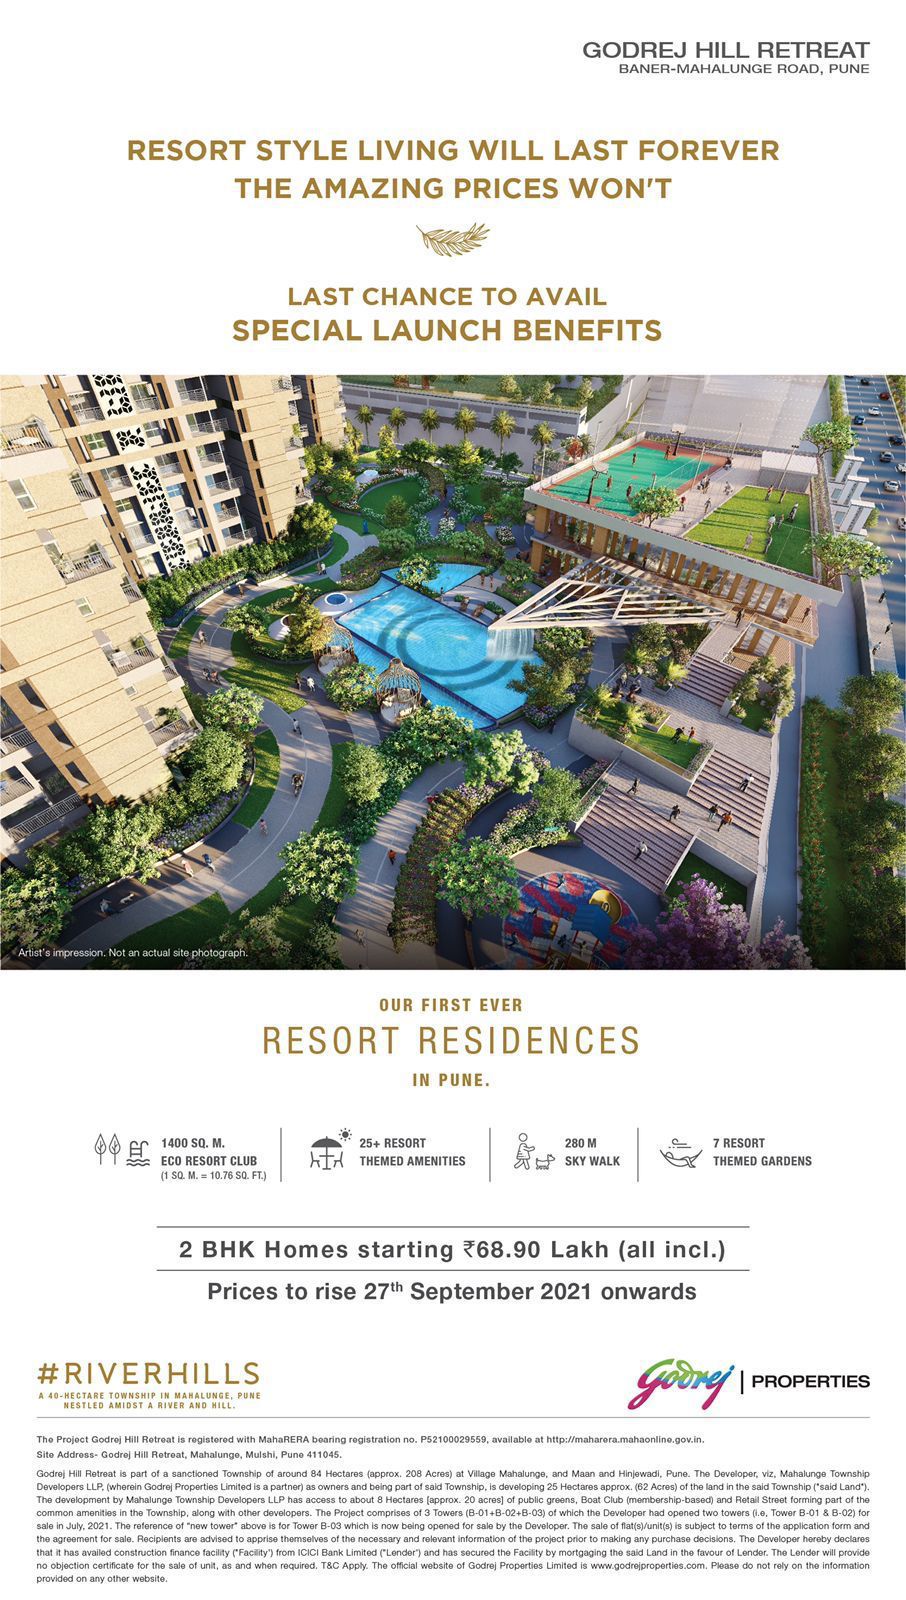 Last chance to avail special launch benefits at Godrej Hill Retreat in Pune